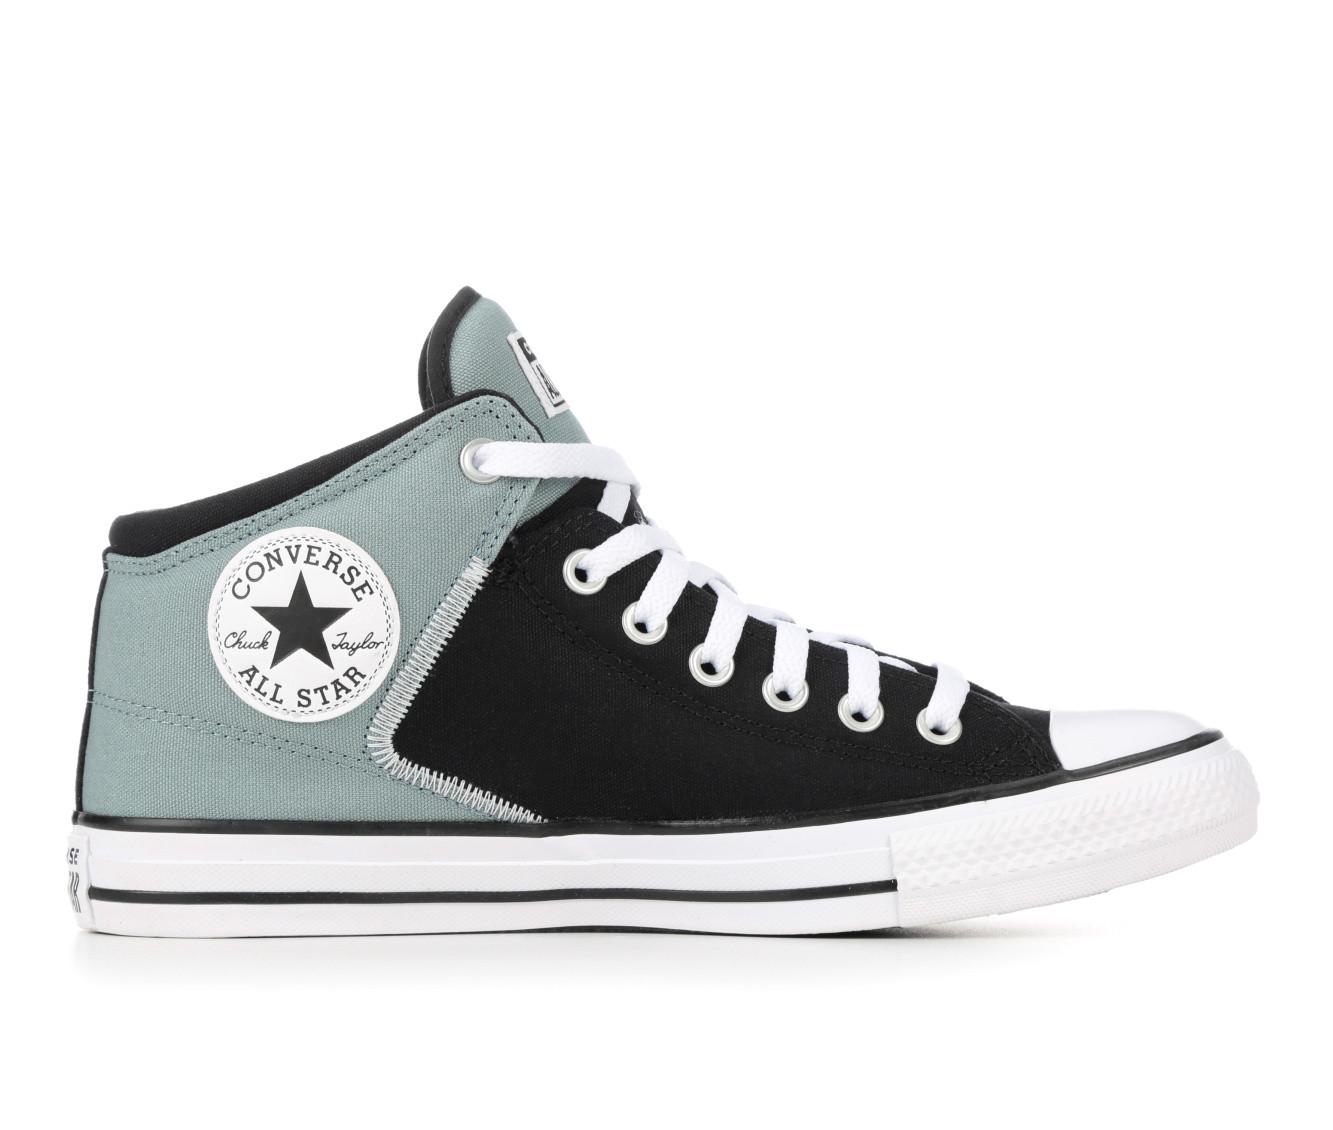 Adults' Converse Chuck Taylor All Star High Street Sneakers